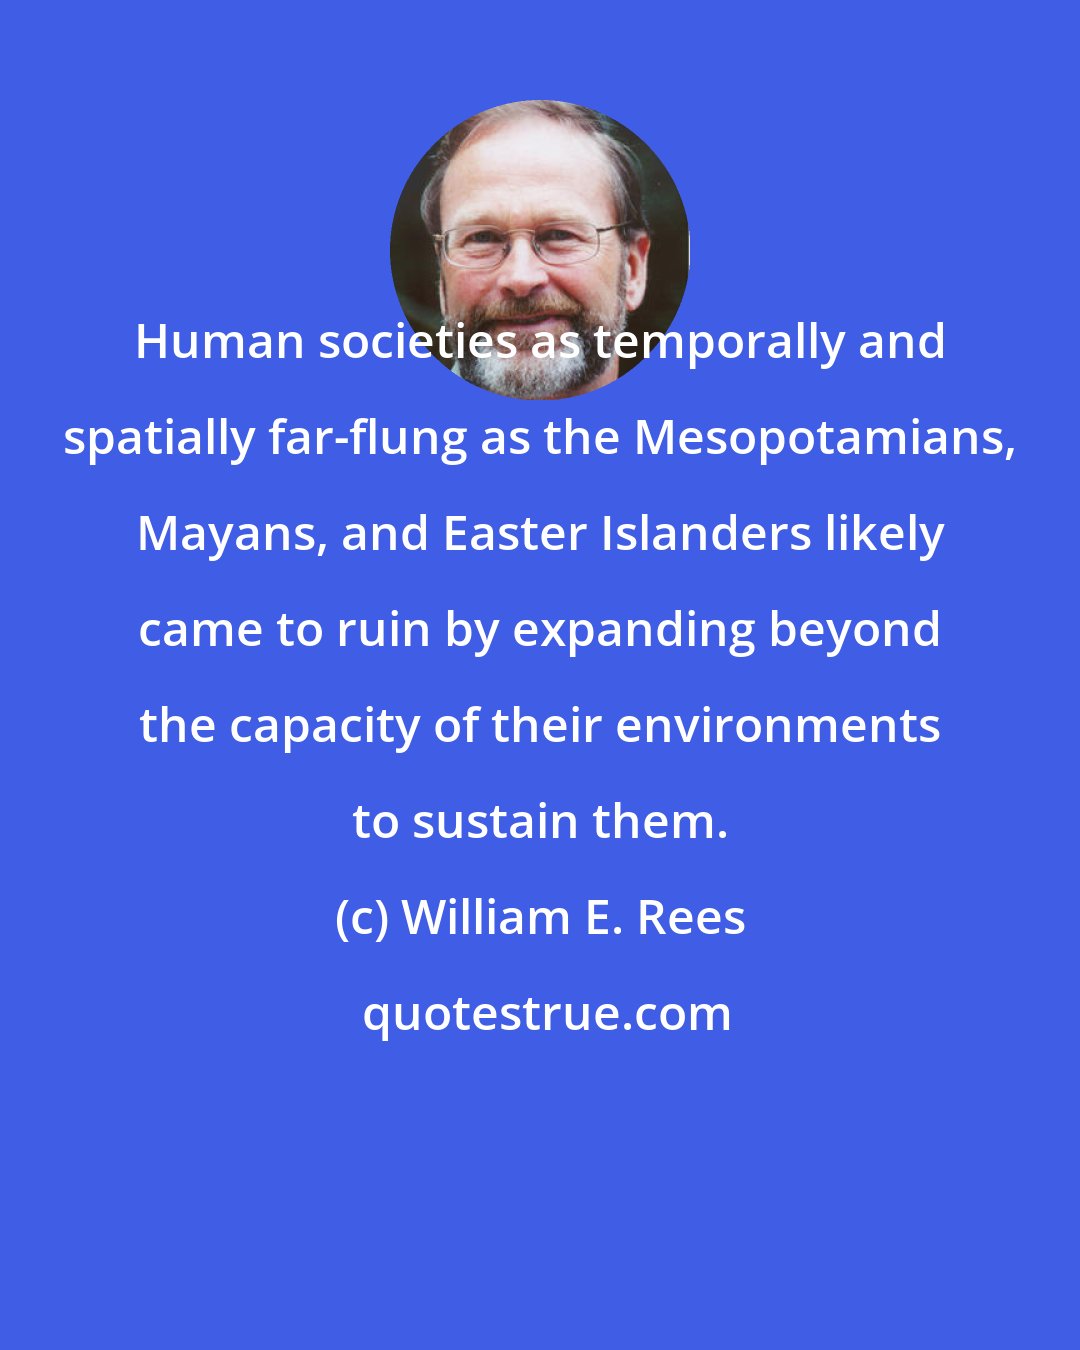 William E. Rees: Human societies as temporally and spatially far-flung as the Mesopotamians, Mayans, and Easter Islanders likely came to ruin by expanding beyond the capacity of their environments to sustain them.